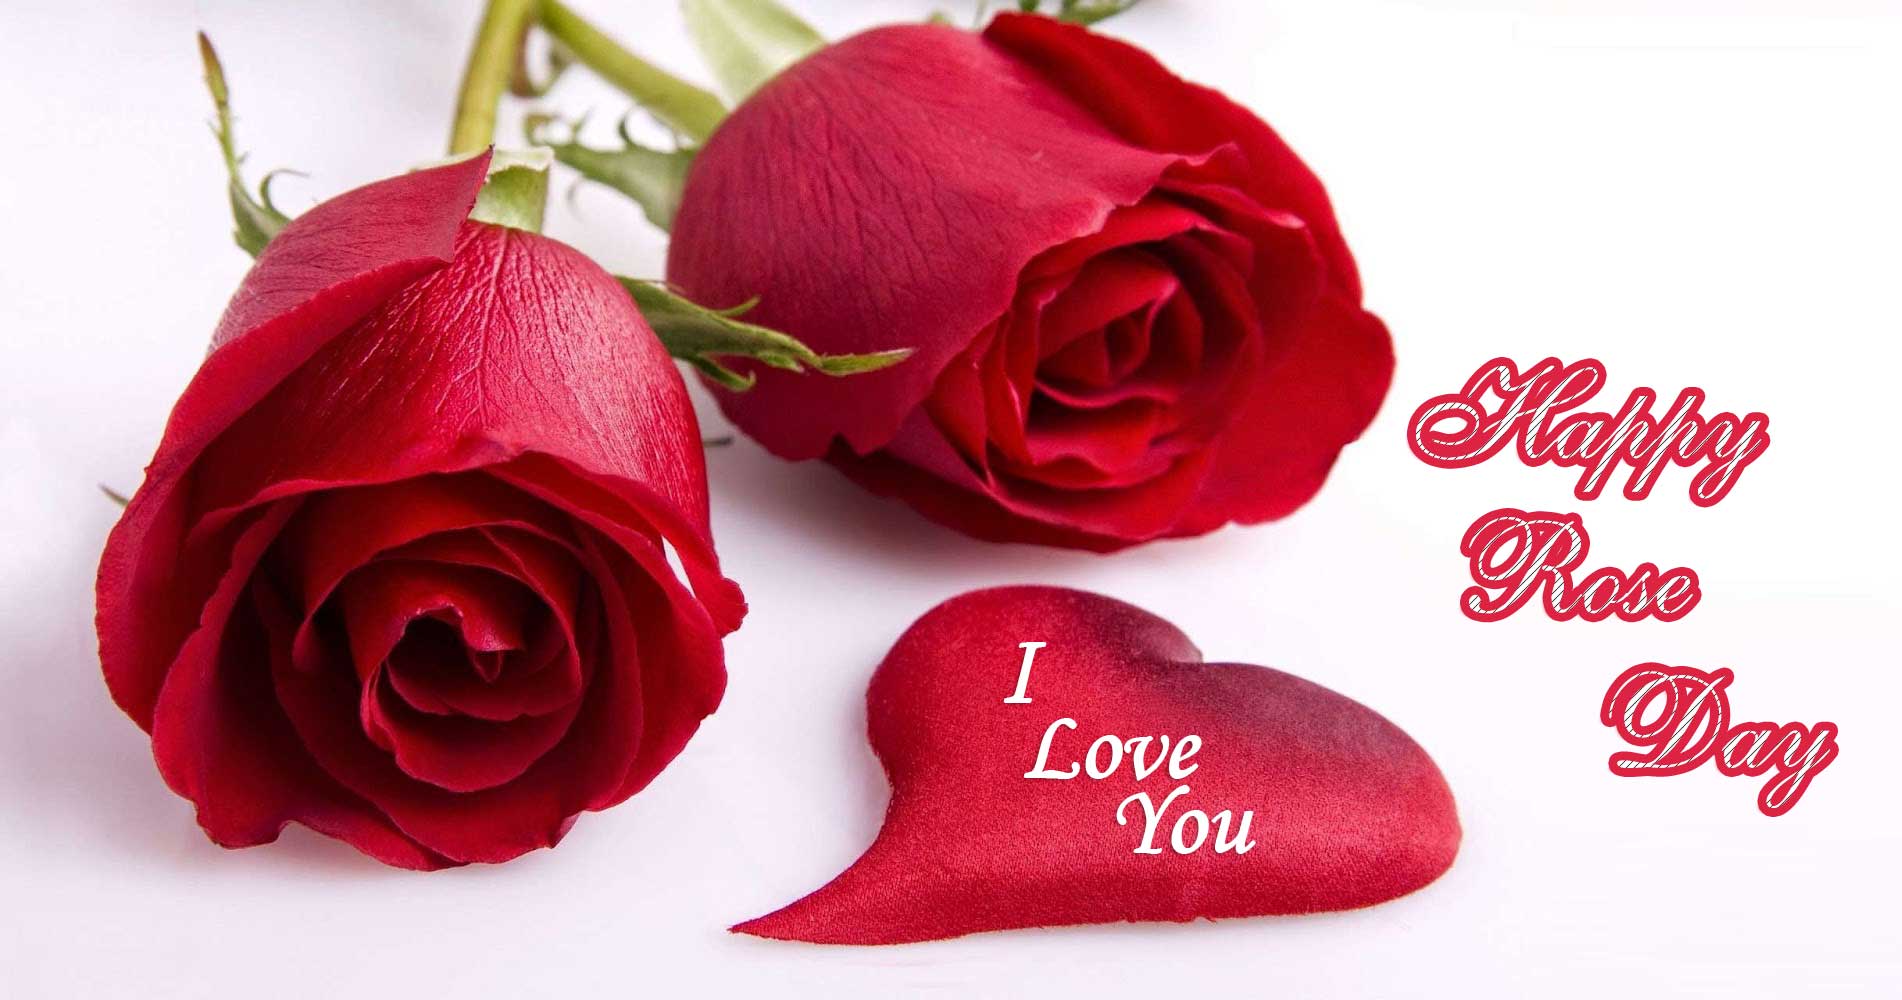 Happy Rose Day Image Greetings 7th February